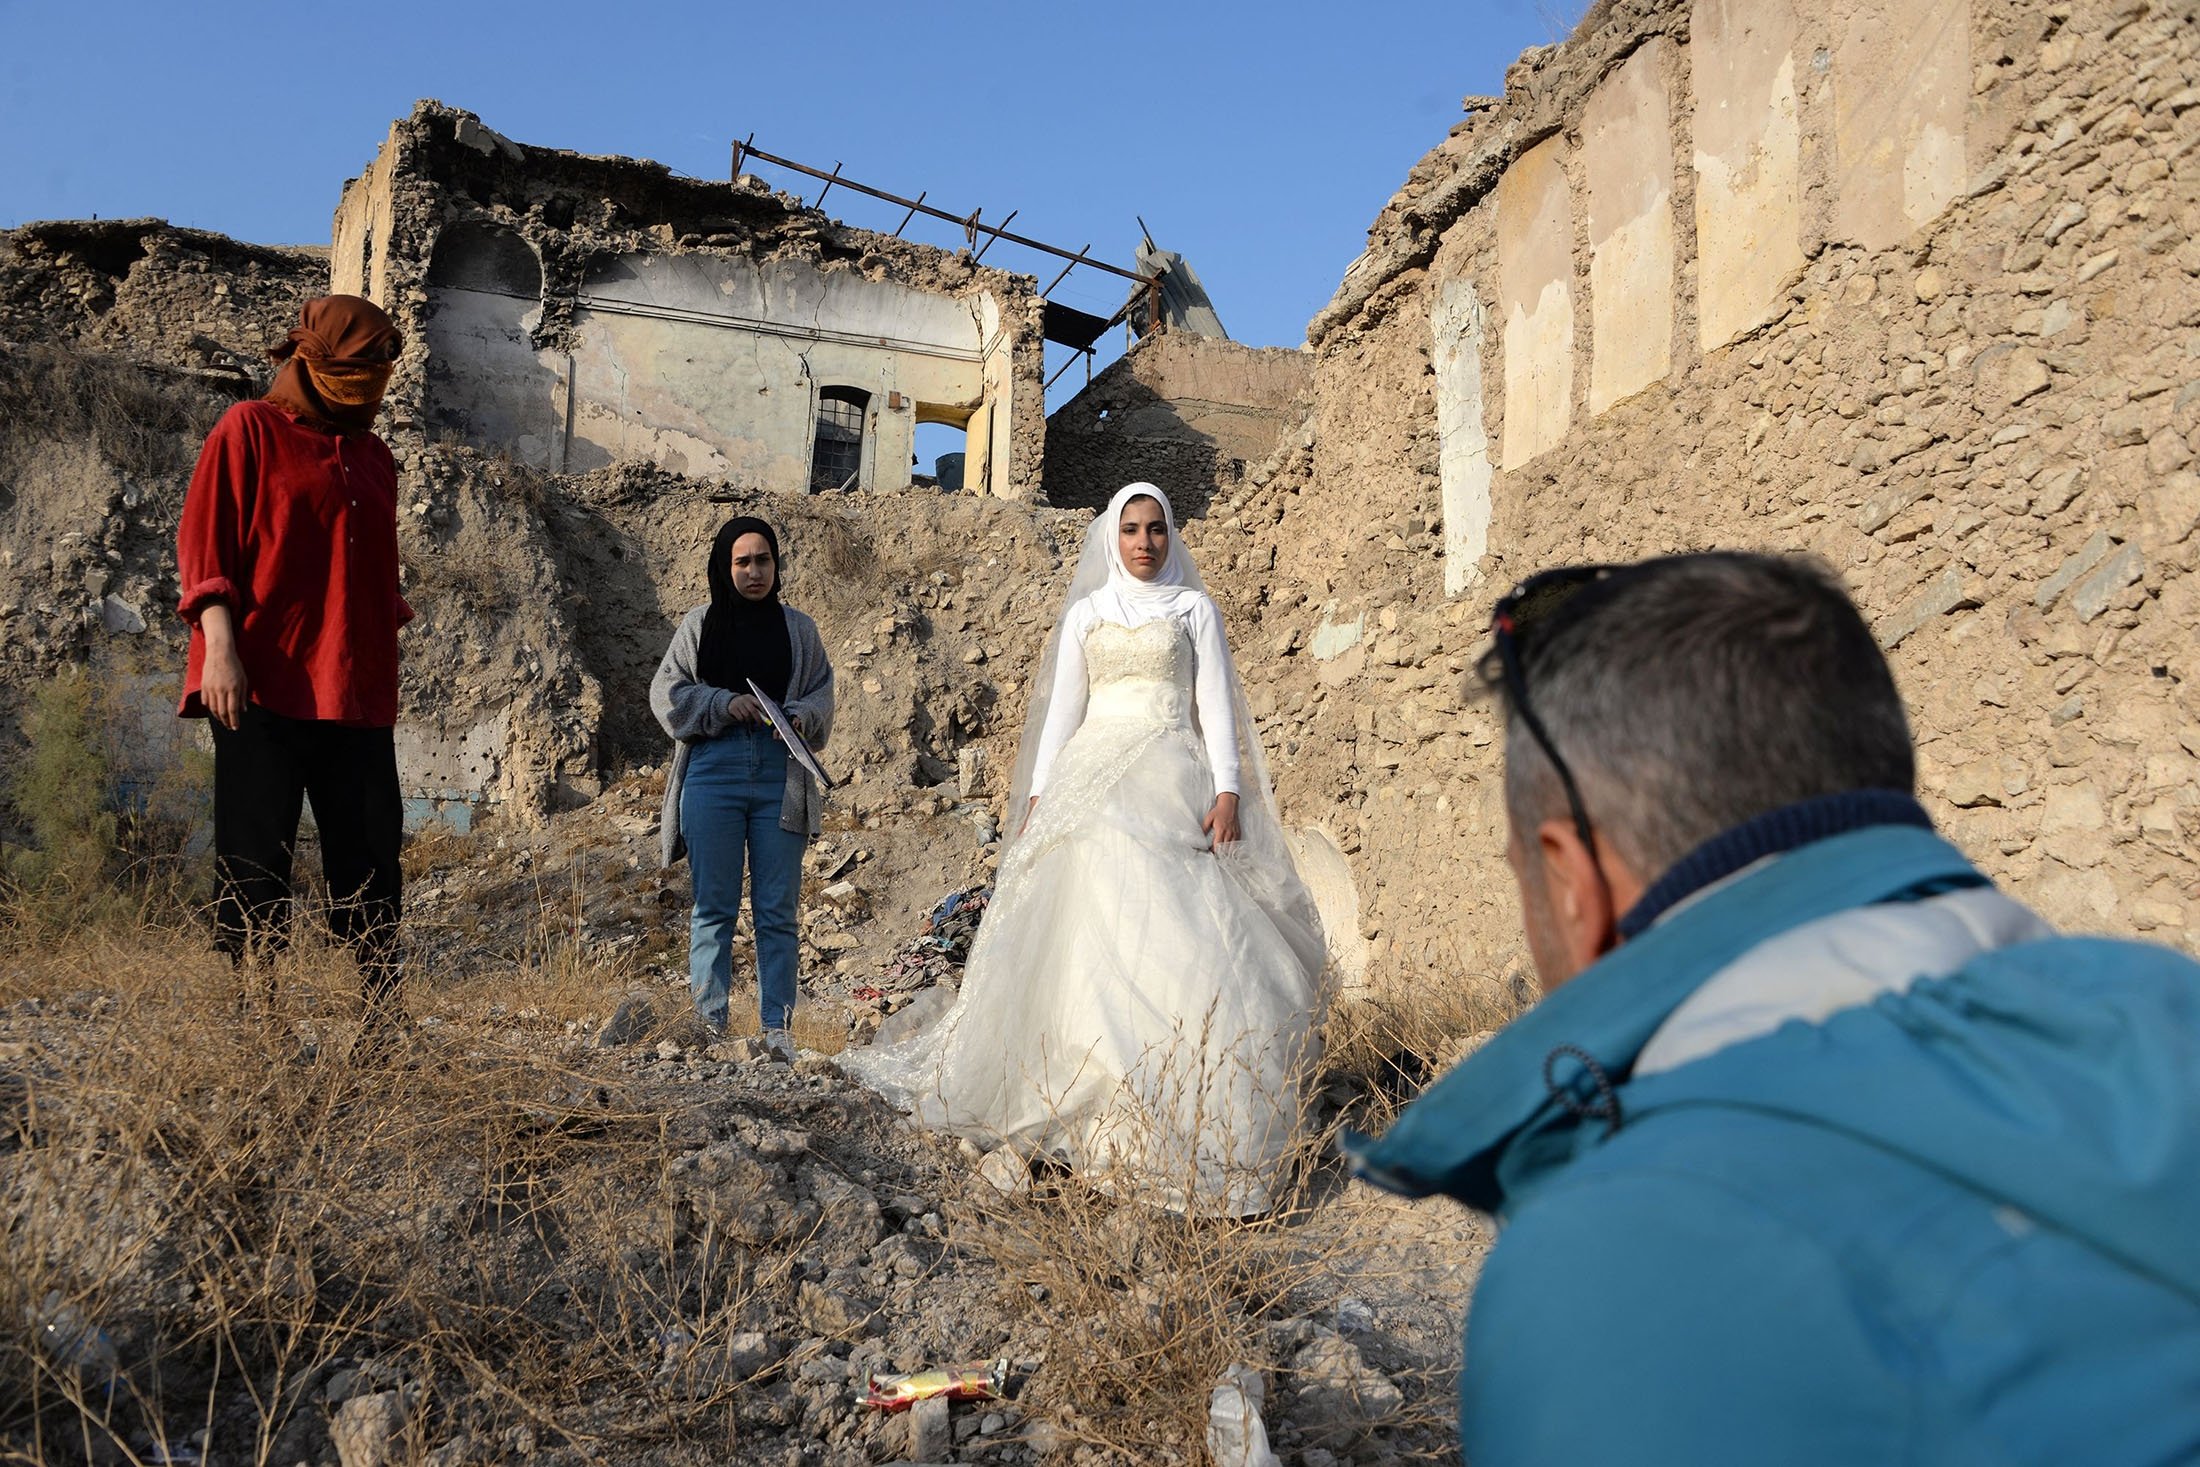 Film school students work in a scene with an actor dressed as a bride in the war-ravaged northern Iraqi city of Mosul, December 15, 2021 (AFP Photo)